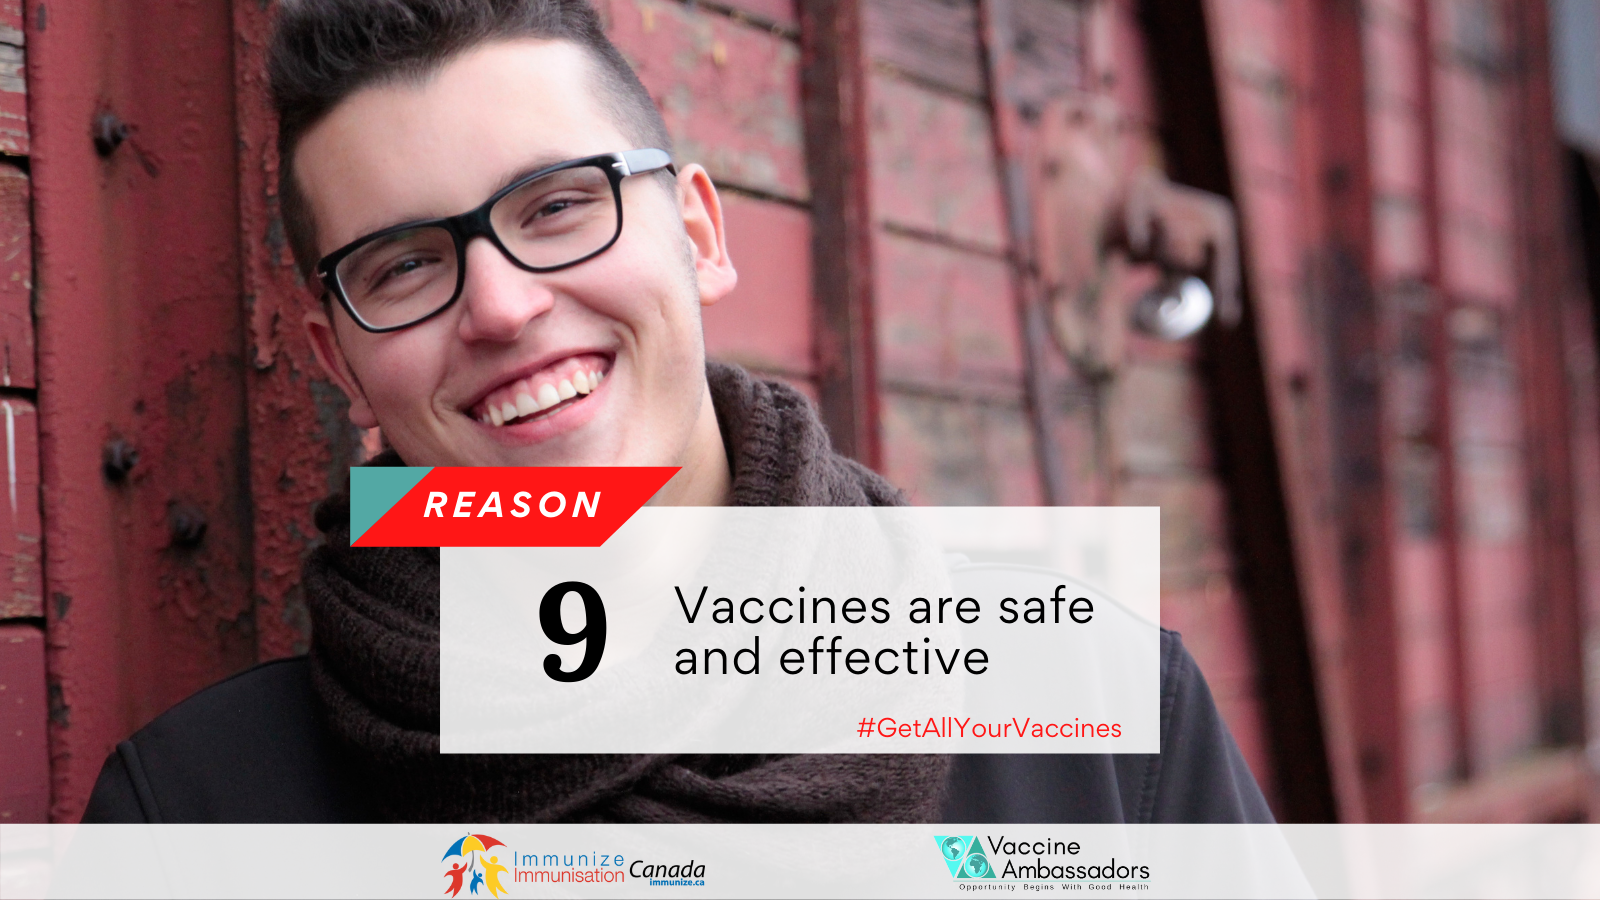 Reason 9 - Vaccines are safe and effective - Twitter